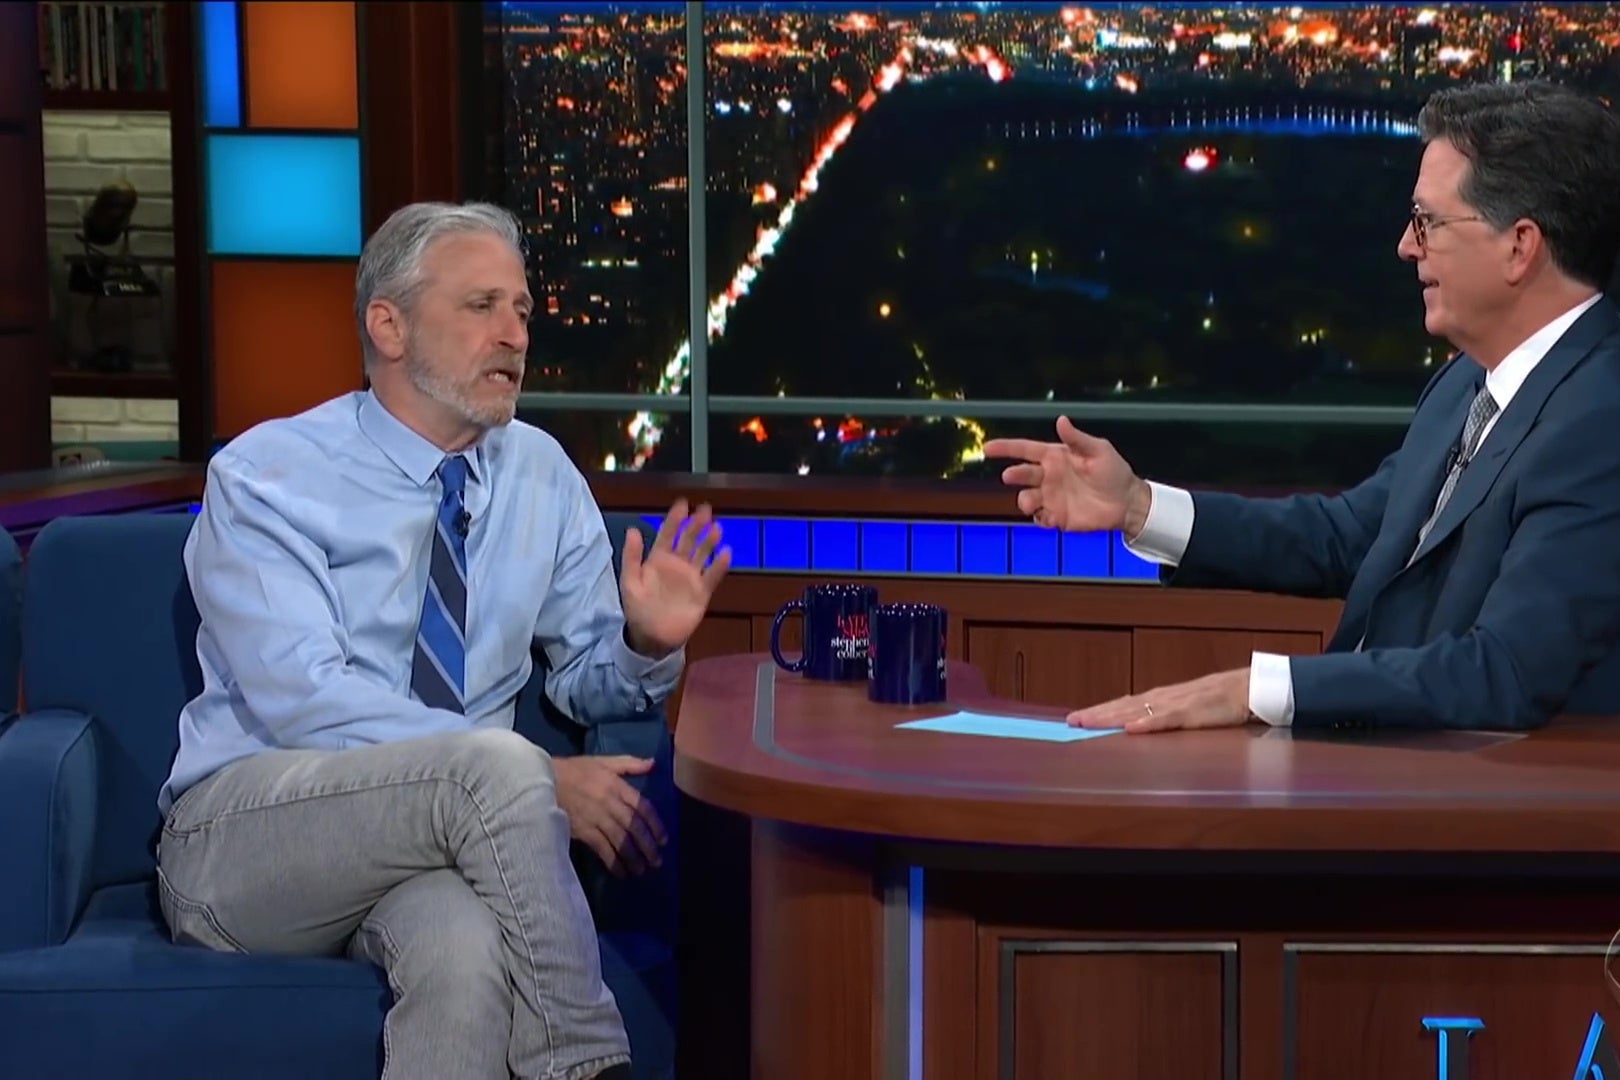 Jon Stewart, in a blue shirt, tie, and jeans, sits in the guest chair on the Late Show set, talking with Stephen Colbert, who sits behind the host's desk.